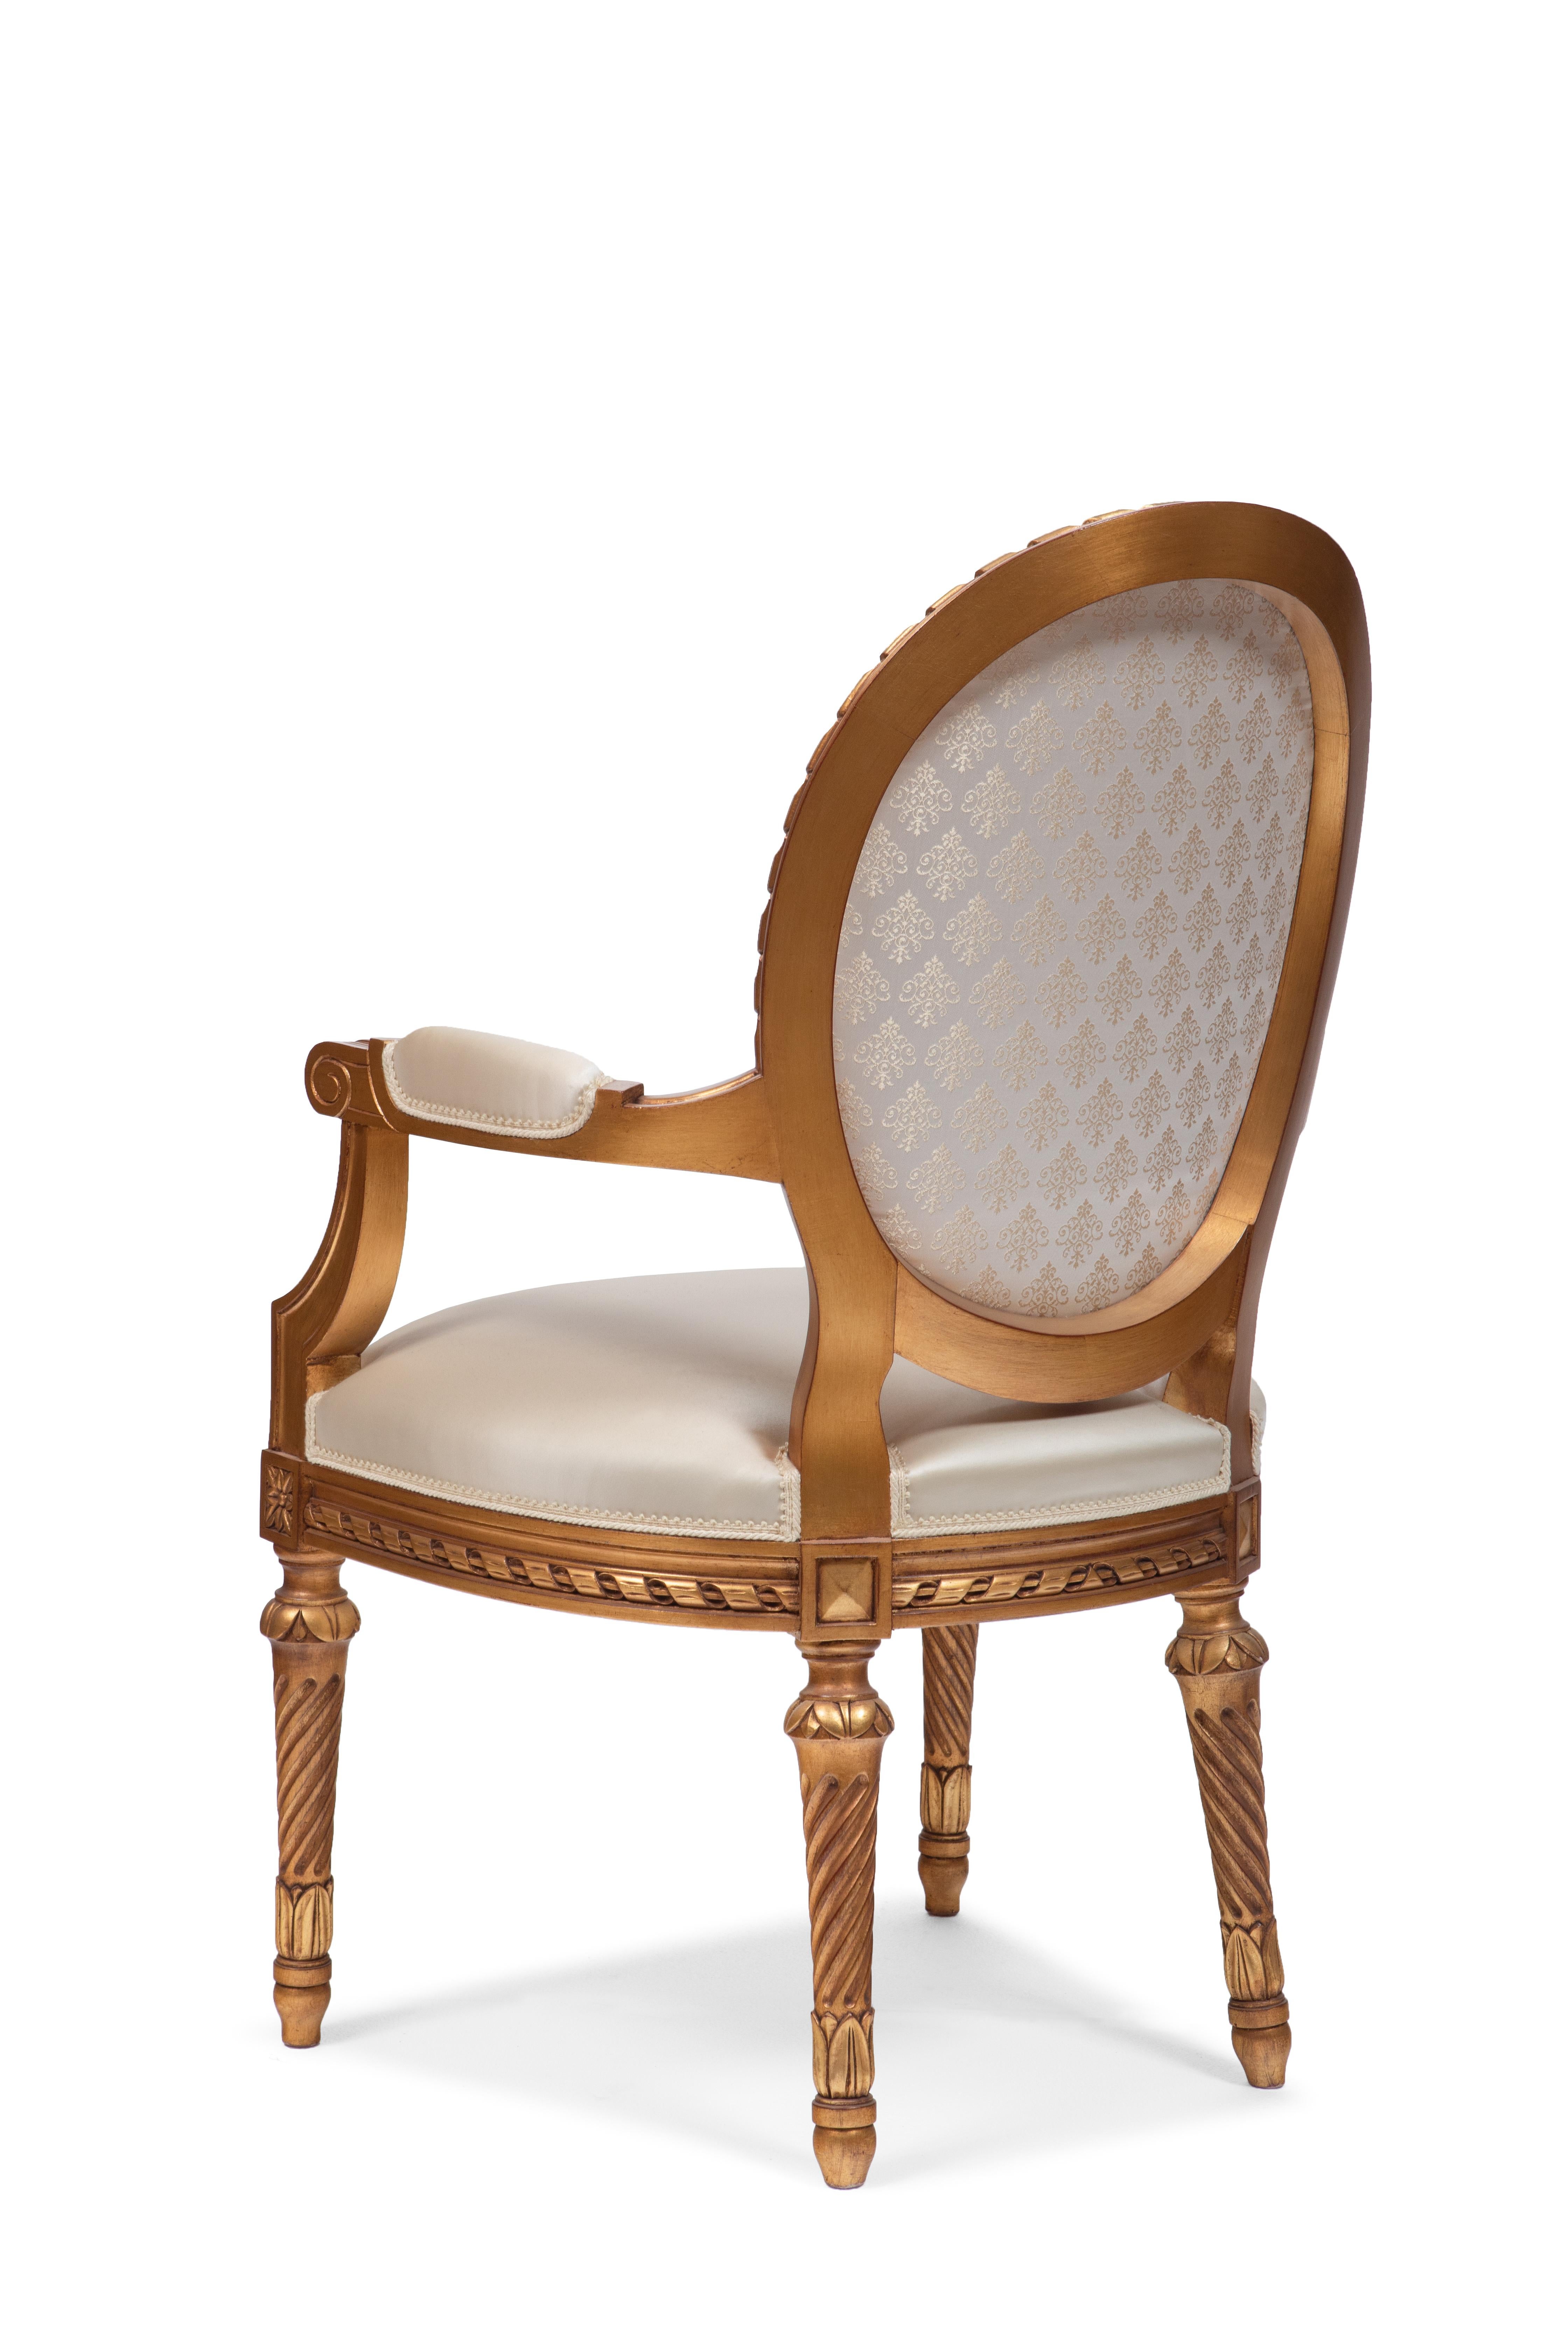 Louis XVI Luis XVI Style Armchair, Hand Carved and Gold Leaf Finishing, Made in Italy For Sale